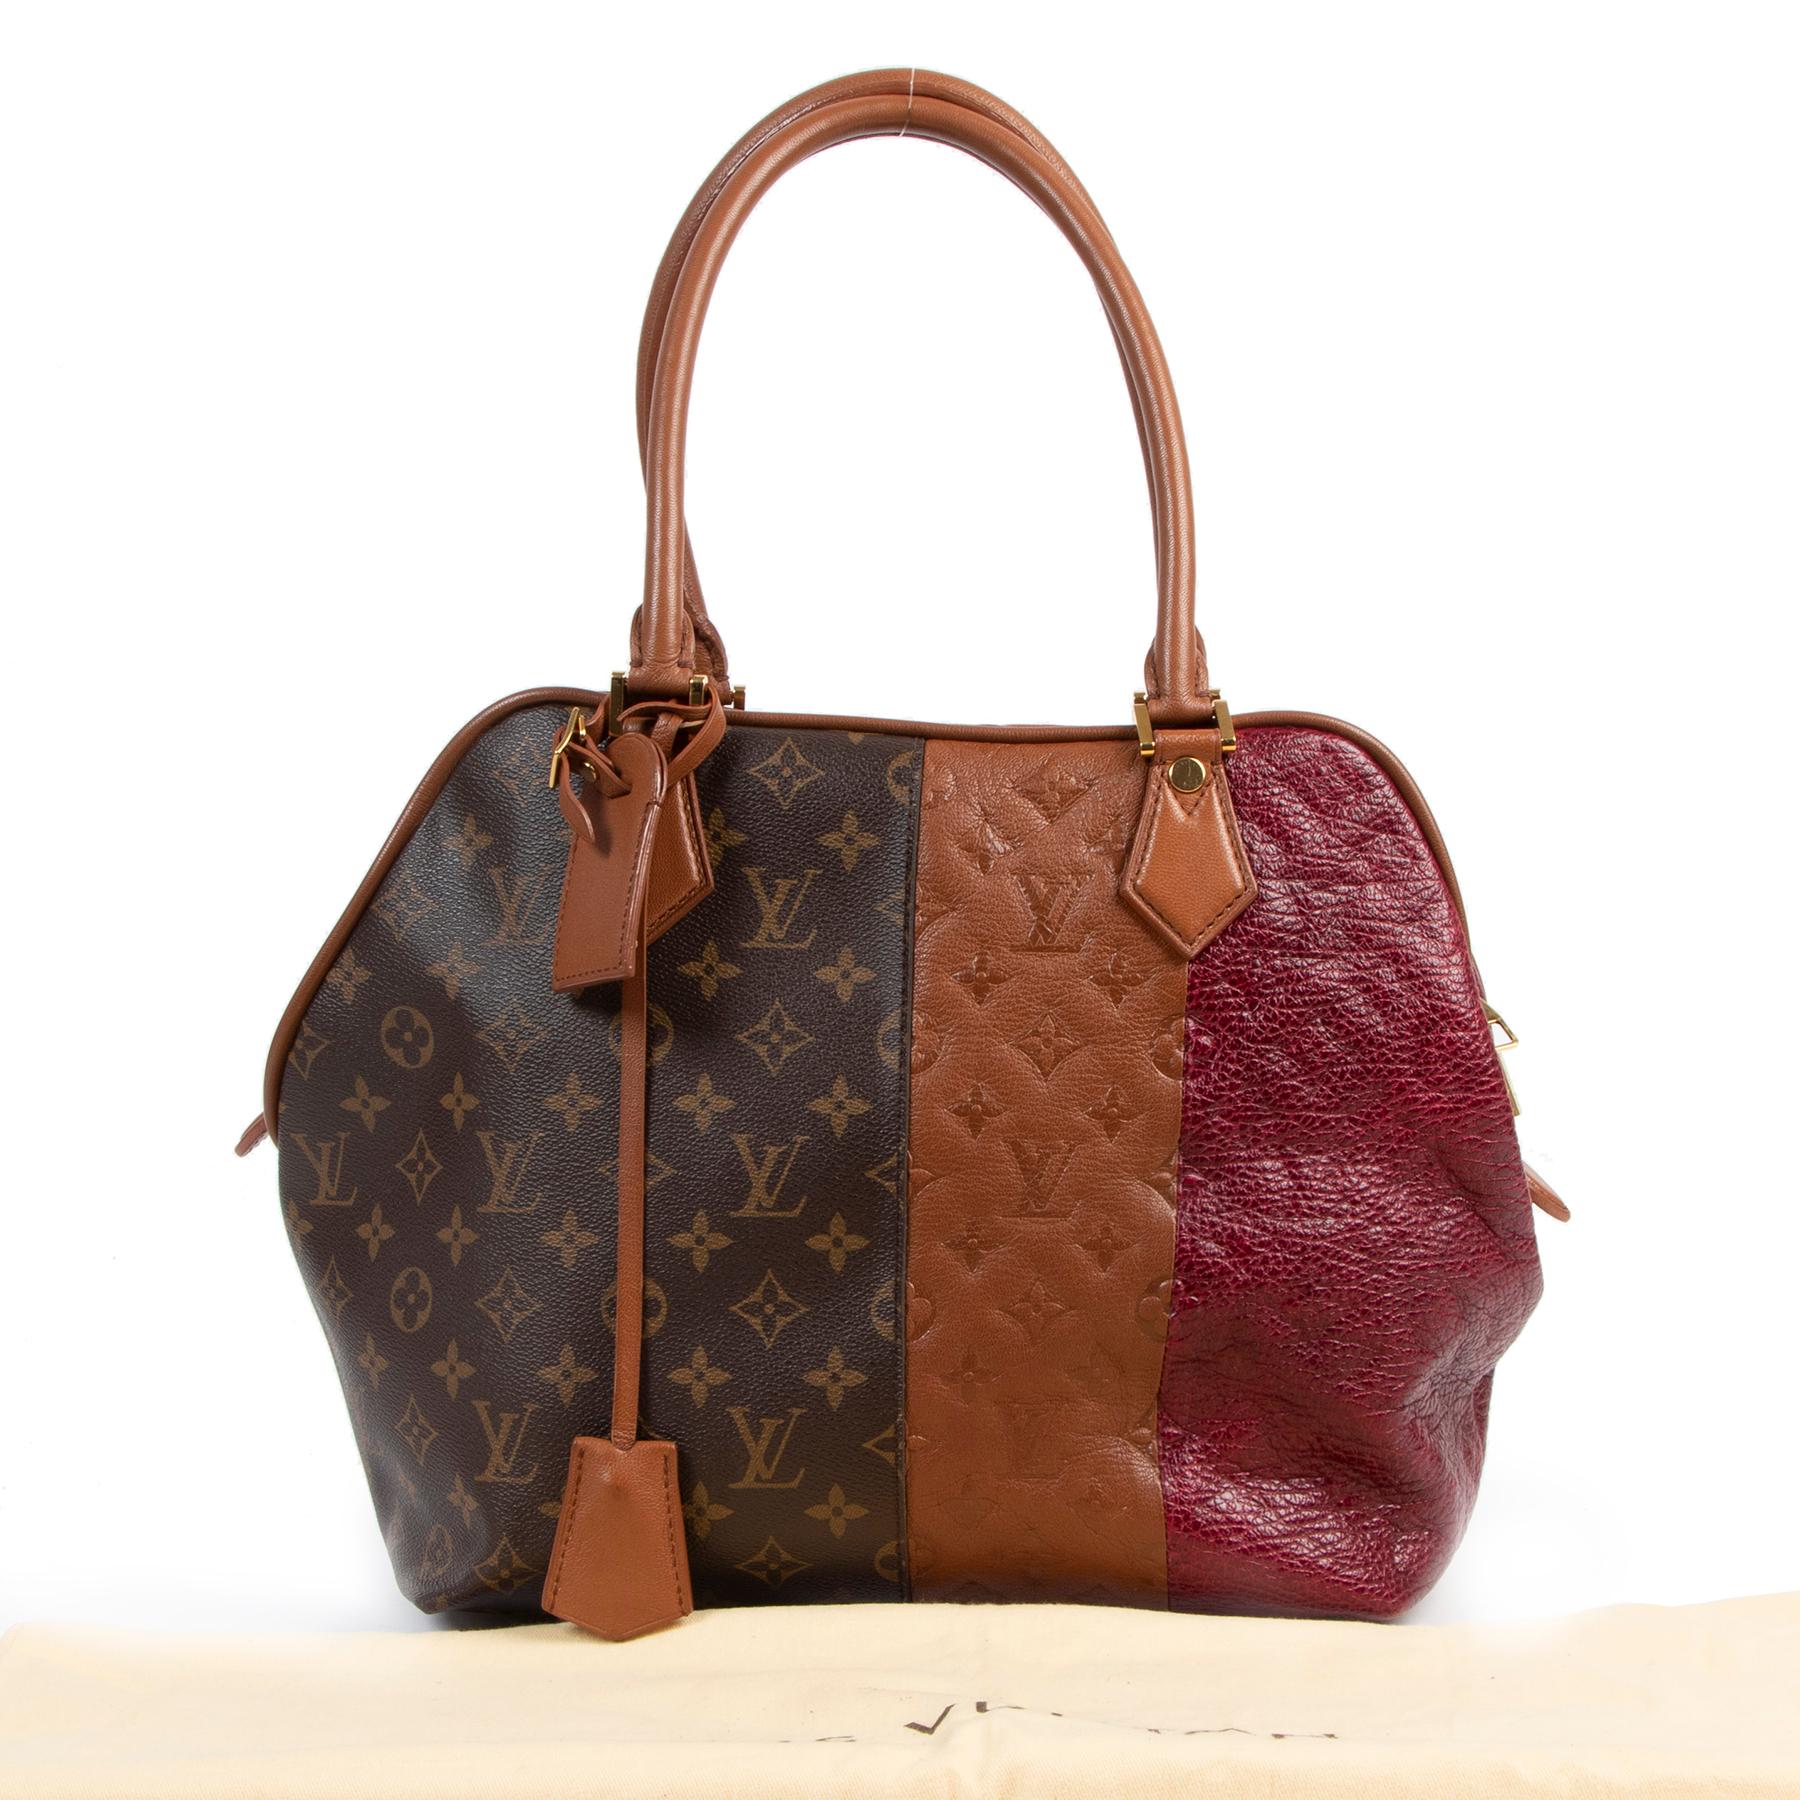 Take your handbag collection to a whole new level with this incredible limited edition Louis Vuitton blocks zipped tote bag. This beautiful bag dates back to the 2011 pre-fall collection and is crafted from brown smooth goat leather with a burgundy